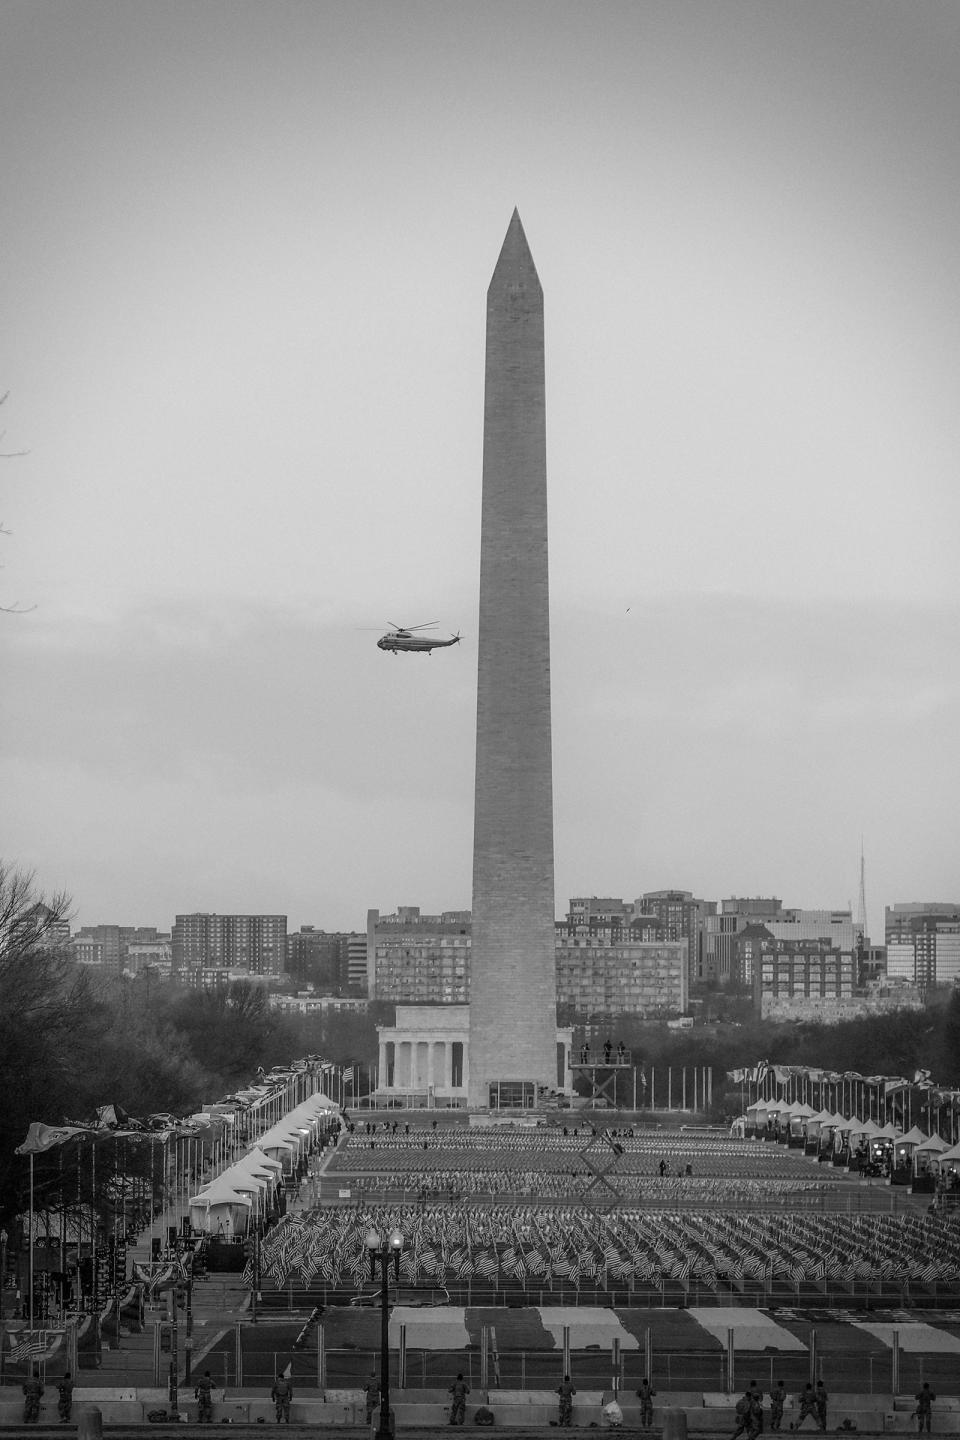 Marine One circles the National Mall carrying Donald Trump as he departs the White House ahead of the inauguration.<span class="copyright">Philip Montgomery for TIME</span>